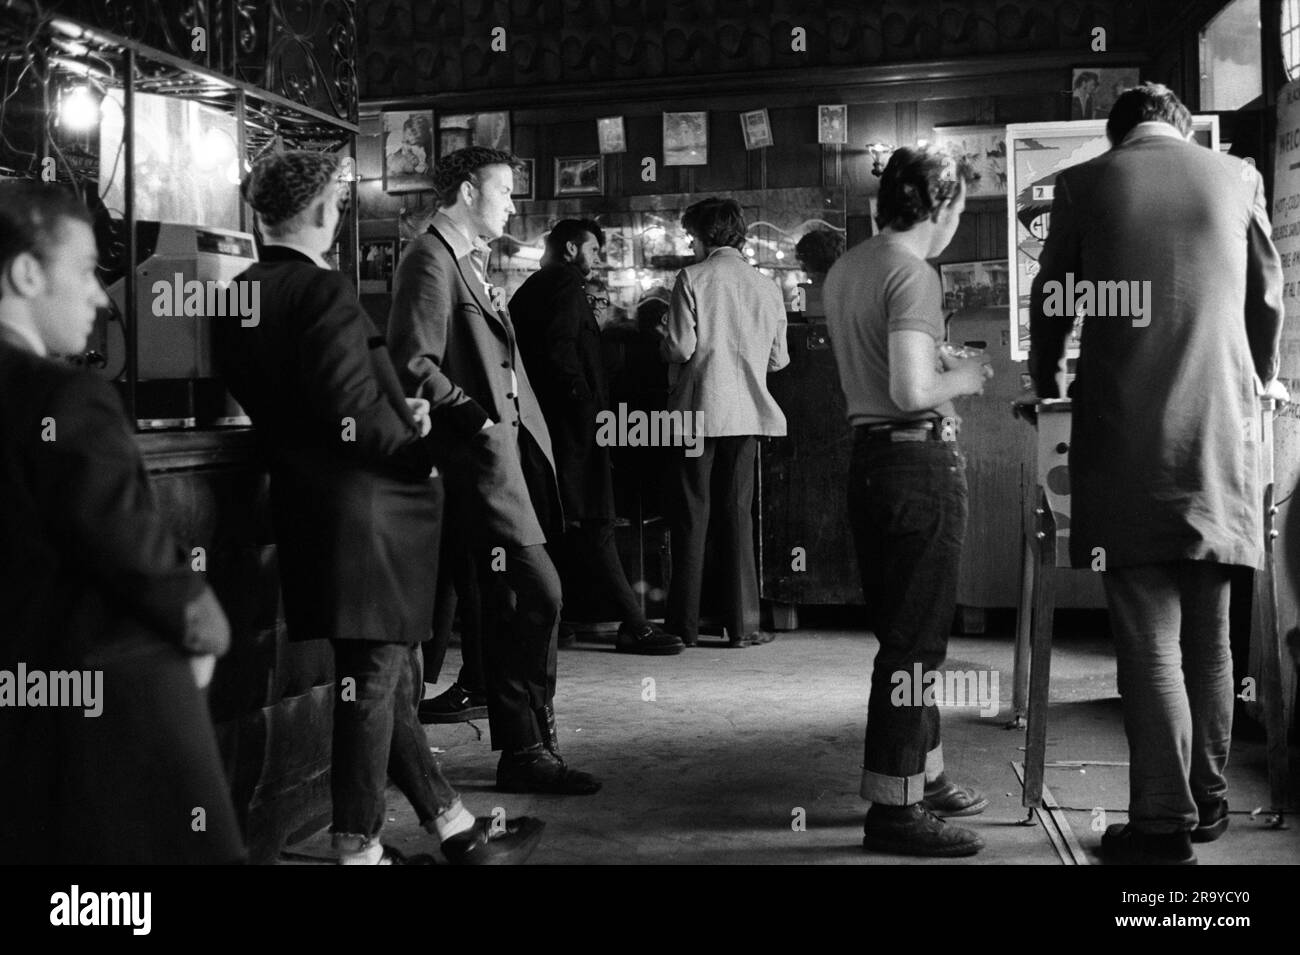 Teddy Boys 1970s. Playing a pinball machine at The Black Raven in Bishopgate Street, a group of Teddy Boys in long drape coats hang out. Moorgate, London, England circa 1975. 1970s UK HOMER SYKES Stock Photo